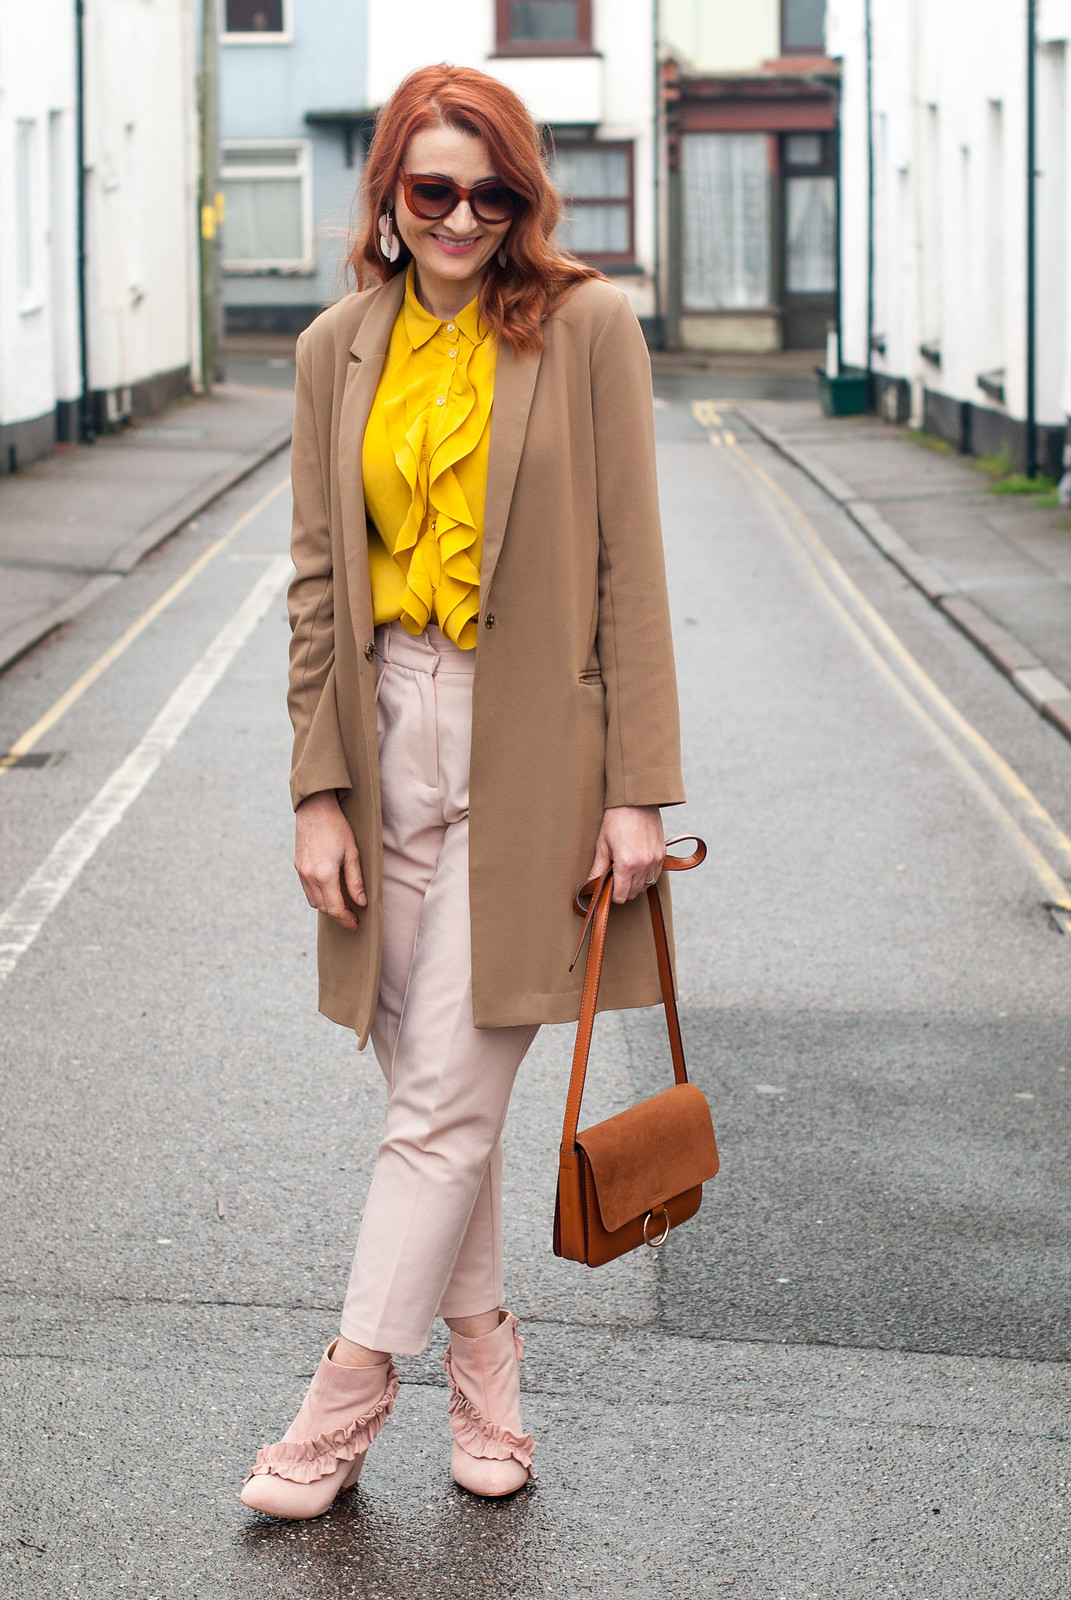 Easter outfit of pastels: Ruffled yellow blouse \ longline camel blazer \ pastel pink peg leg trousers \ tapered pants \ pink ruffle ankle boots | Not Dressed As Lamb, over 40 style